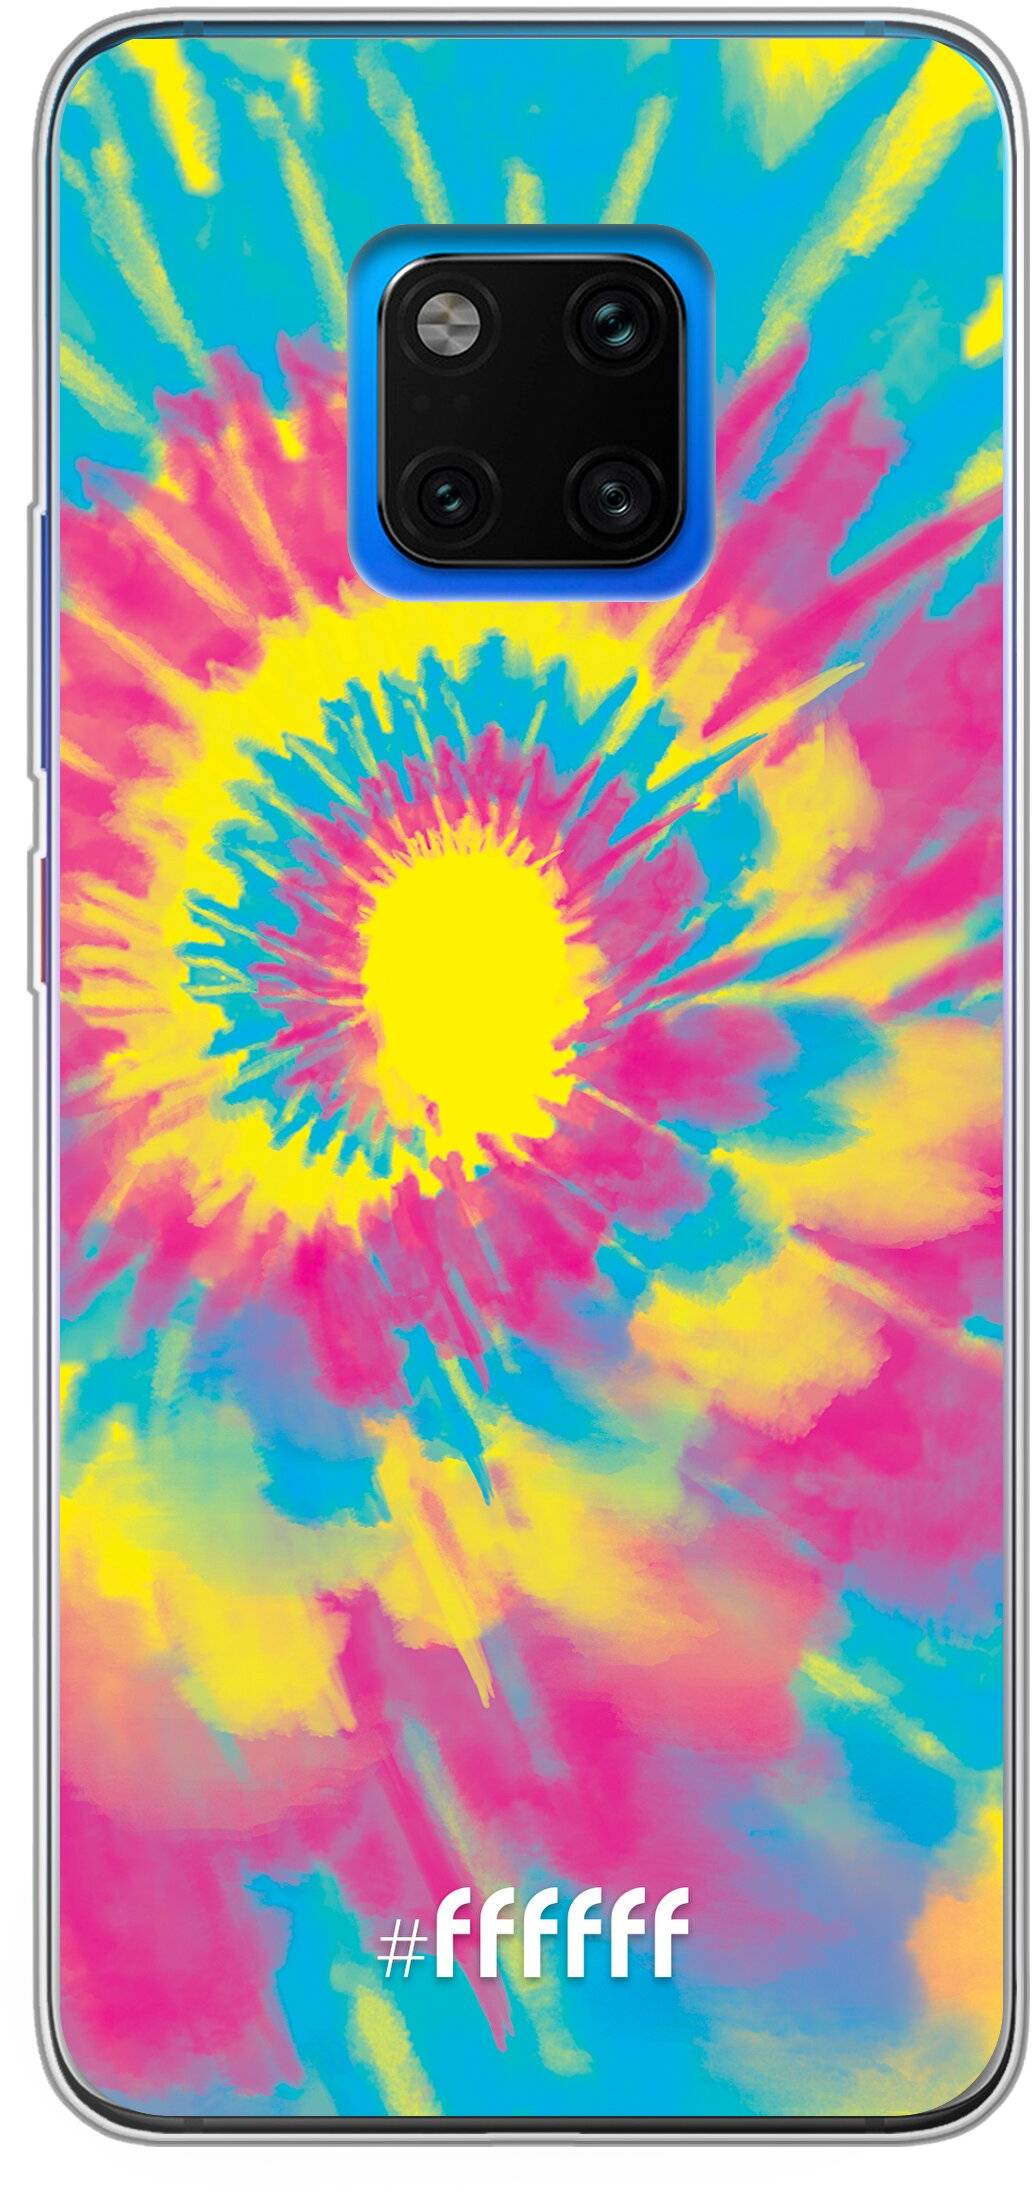 Psychedelic Tie Dye Mate 20 Pro